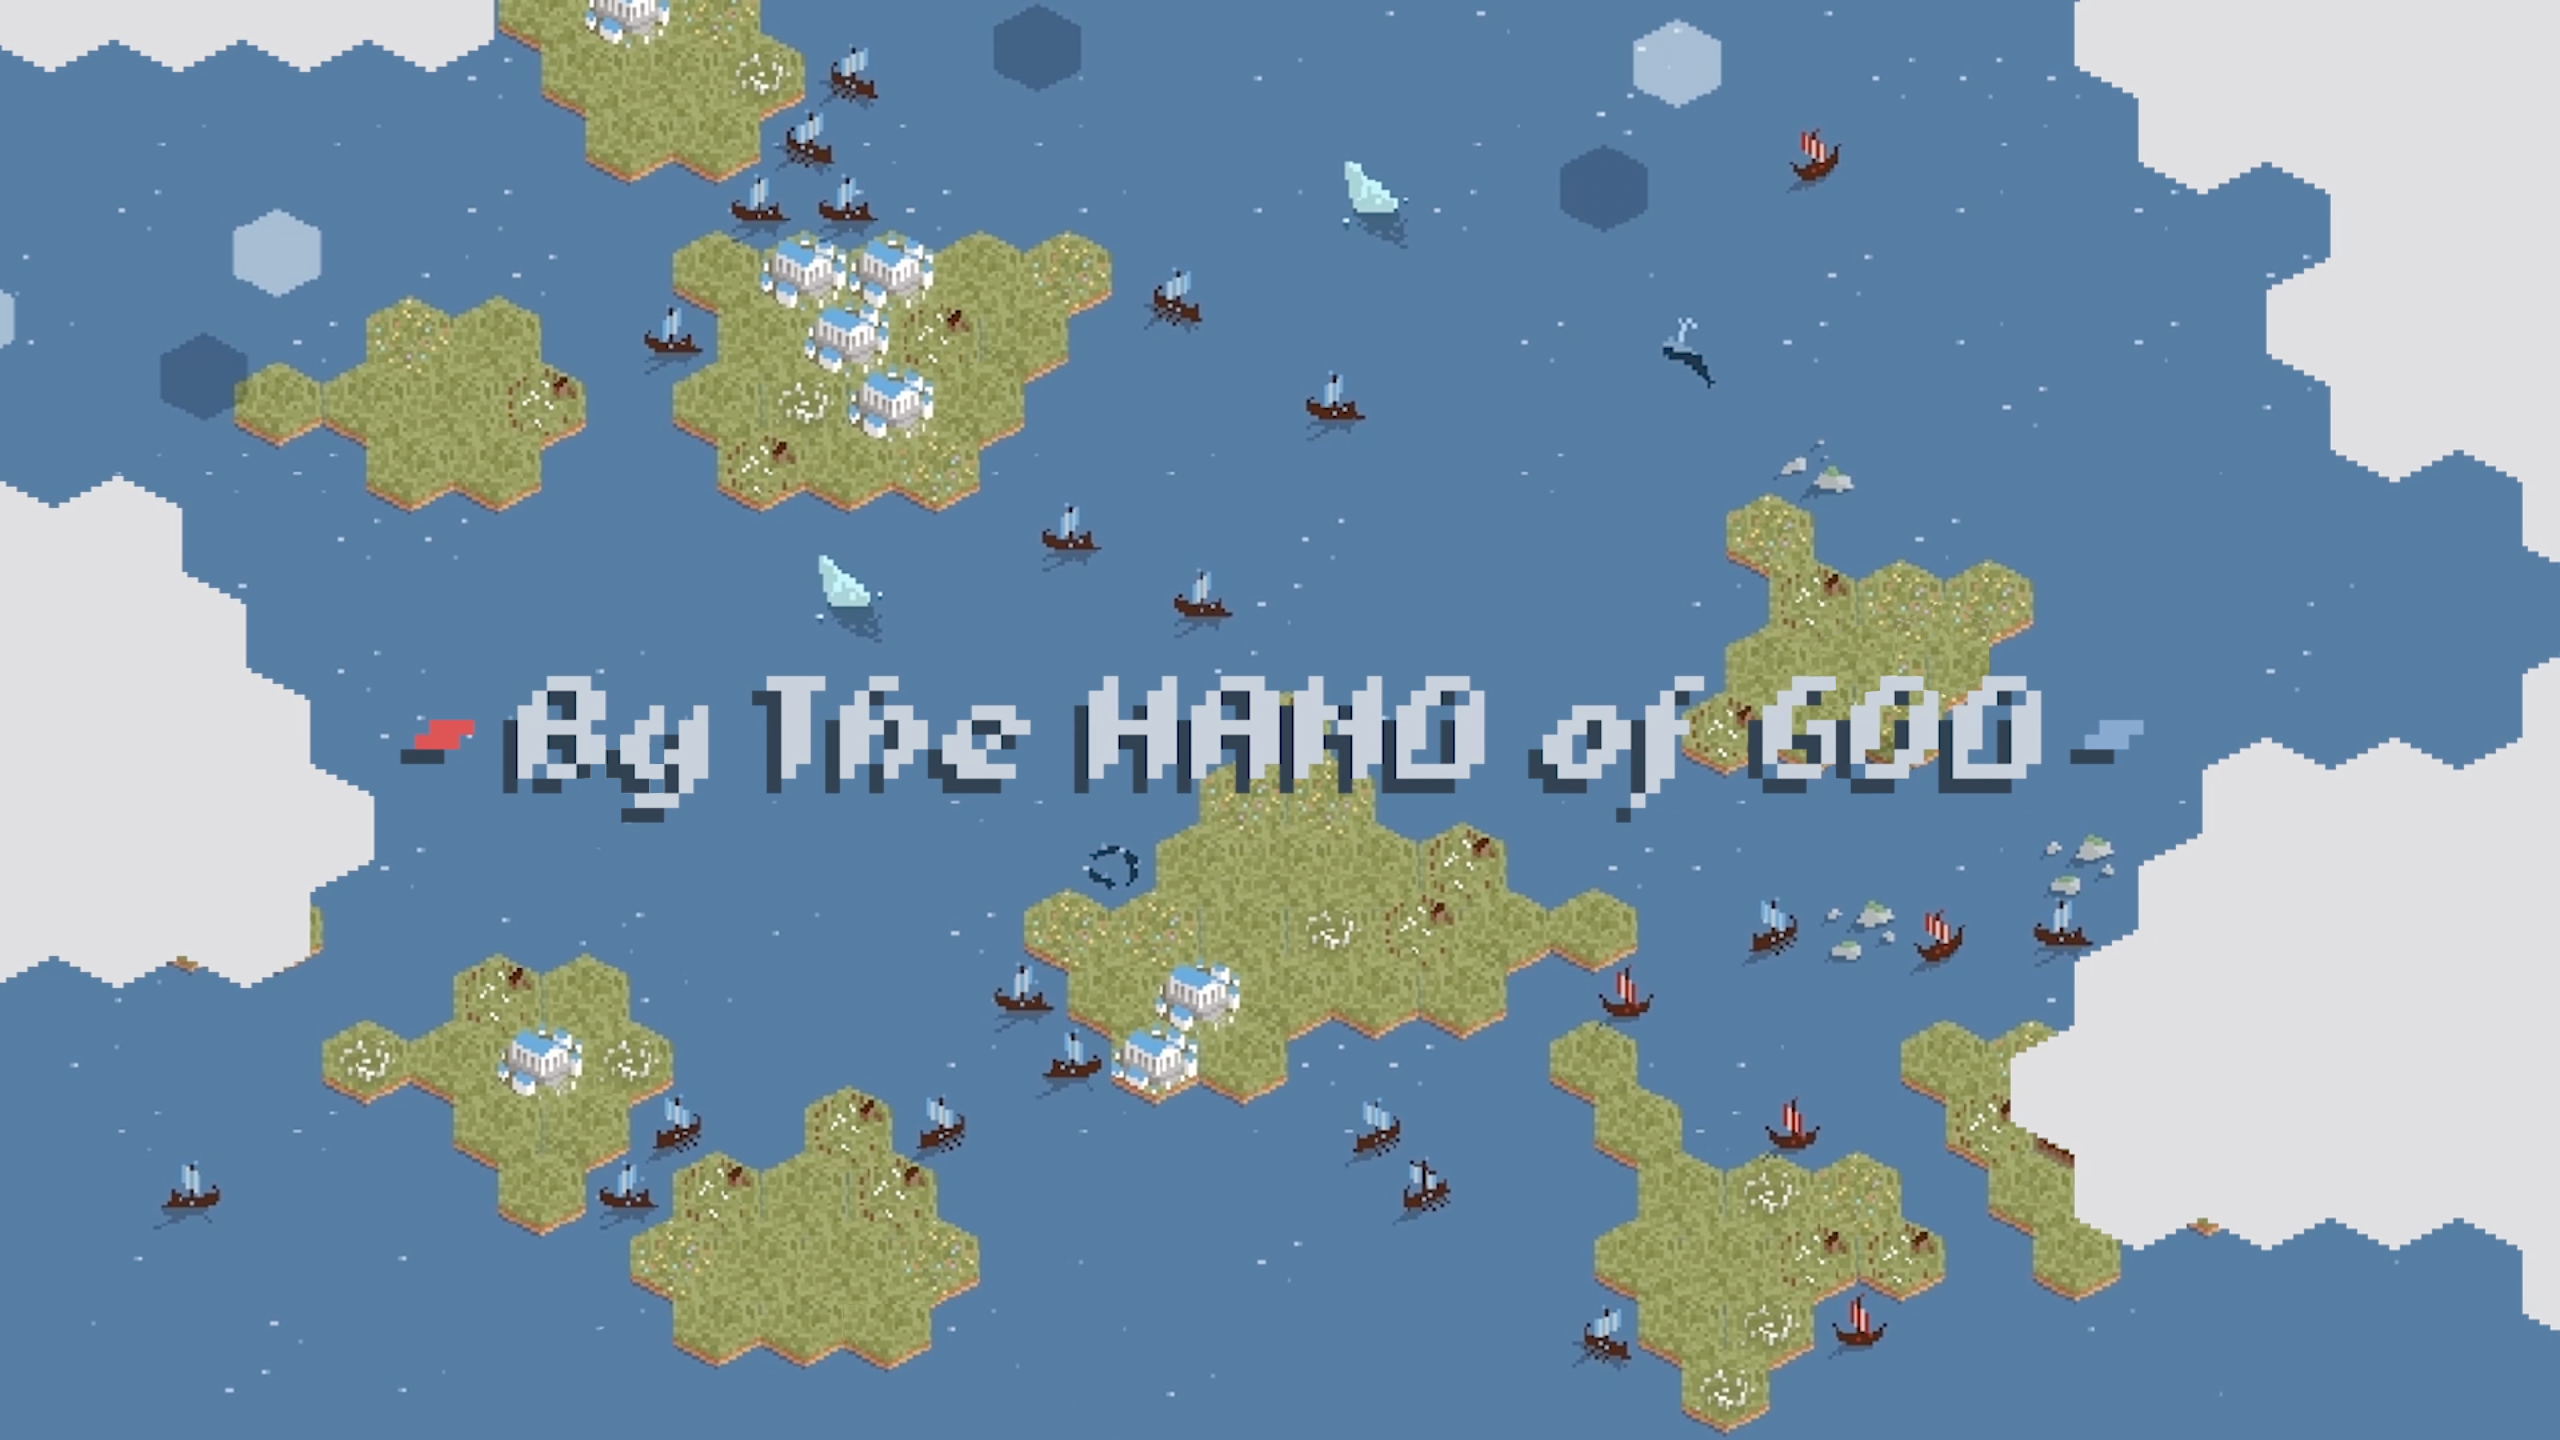 By the hand of God